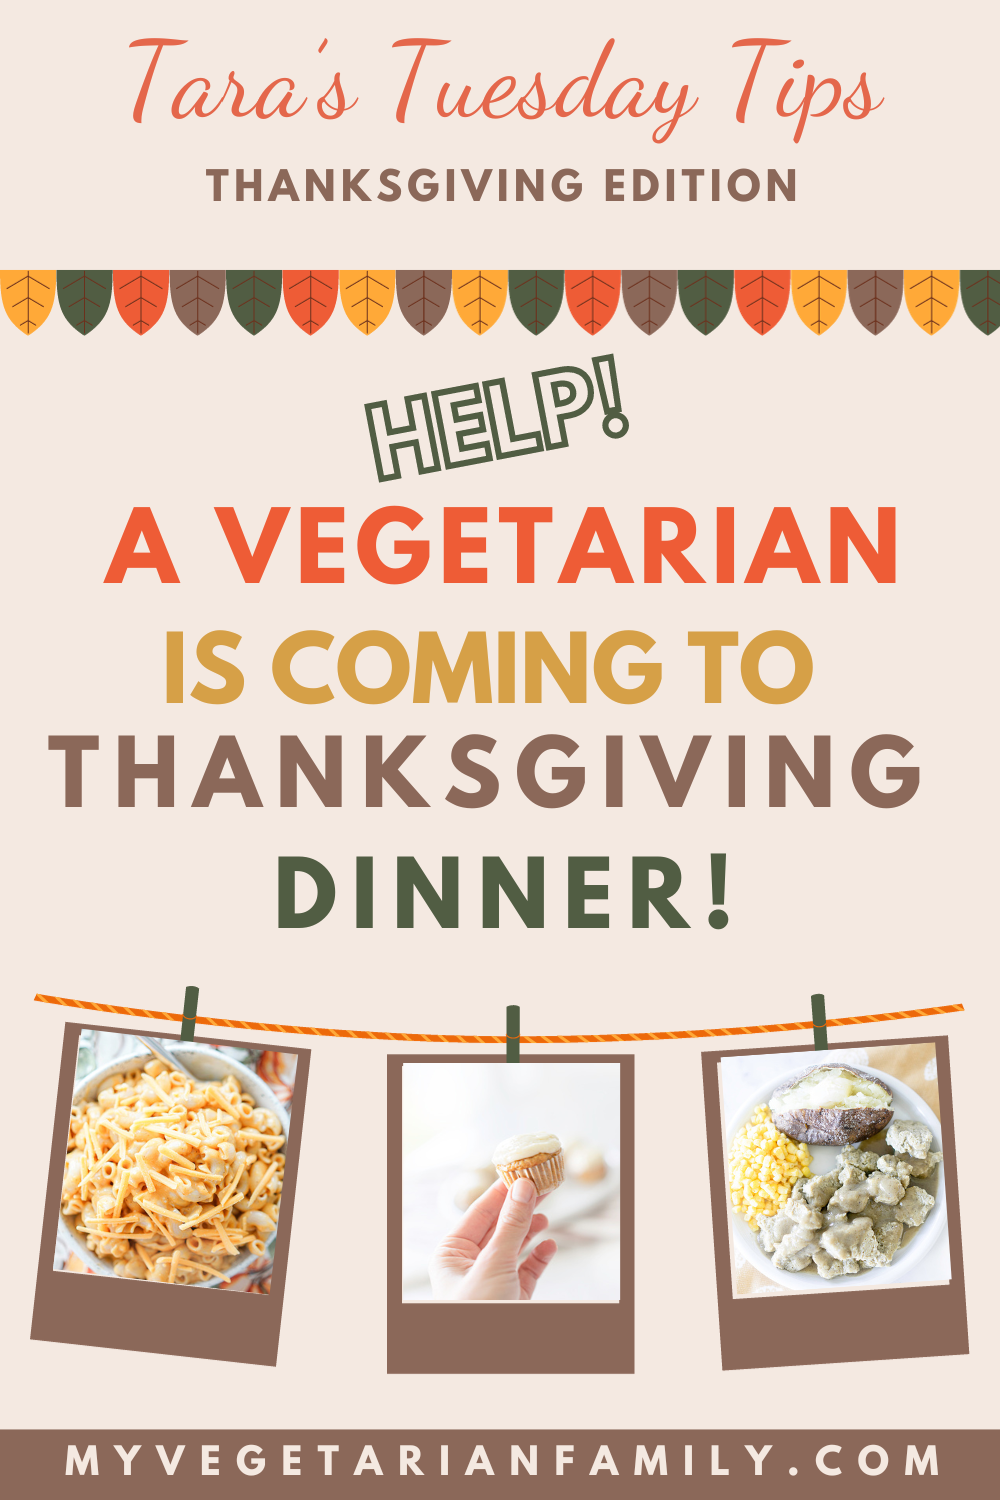 Welcoming a Vegetarian to Thanksgiving Dinner | My Vegetarian Family #veganthanksgiving #vegetarianthanksgiving